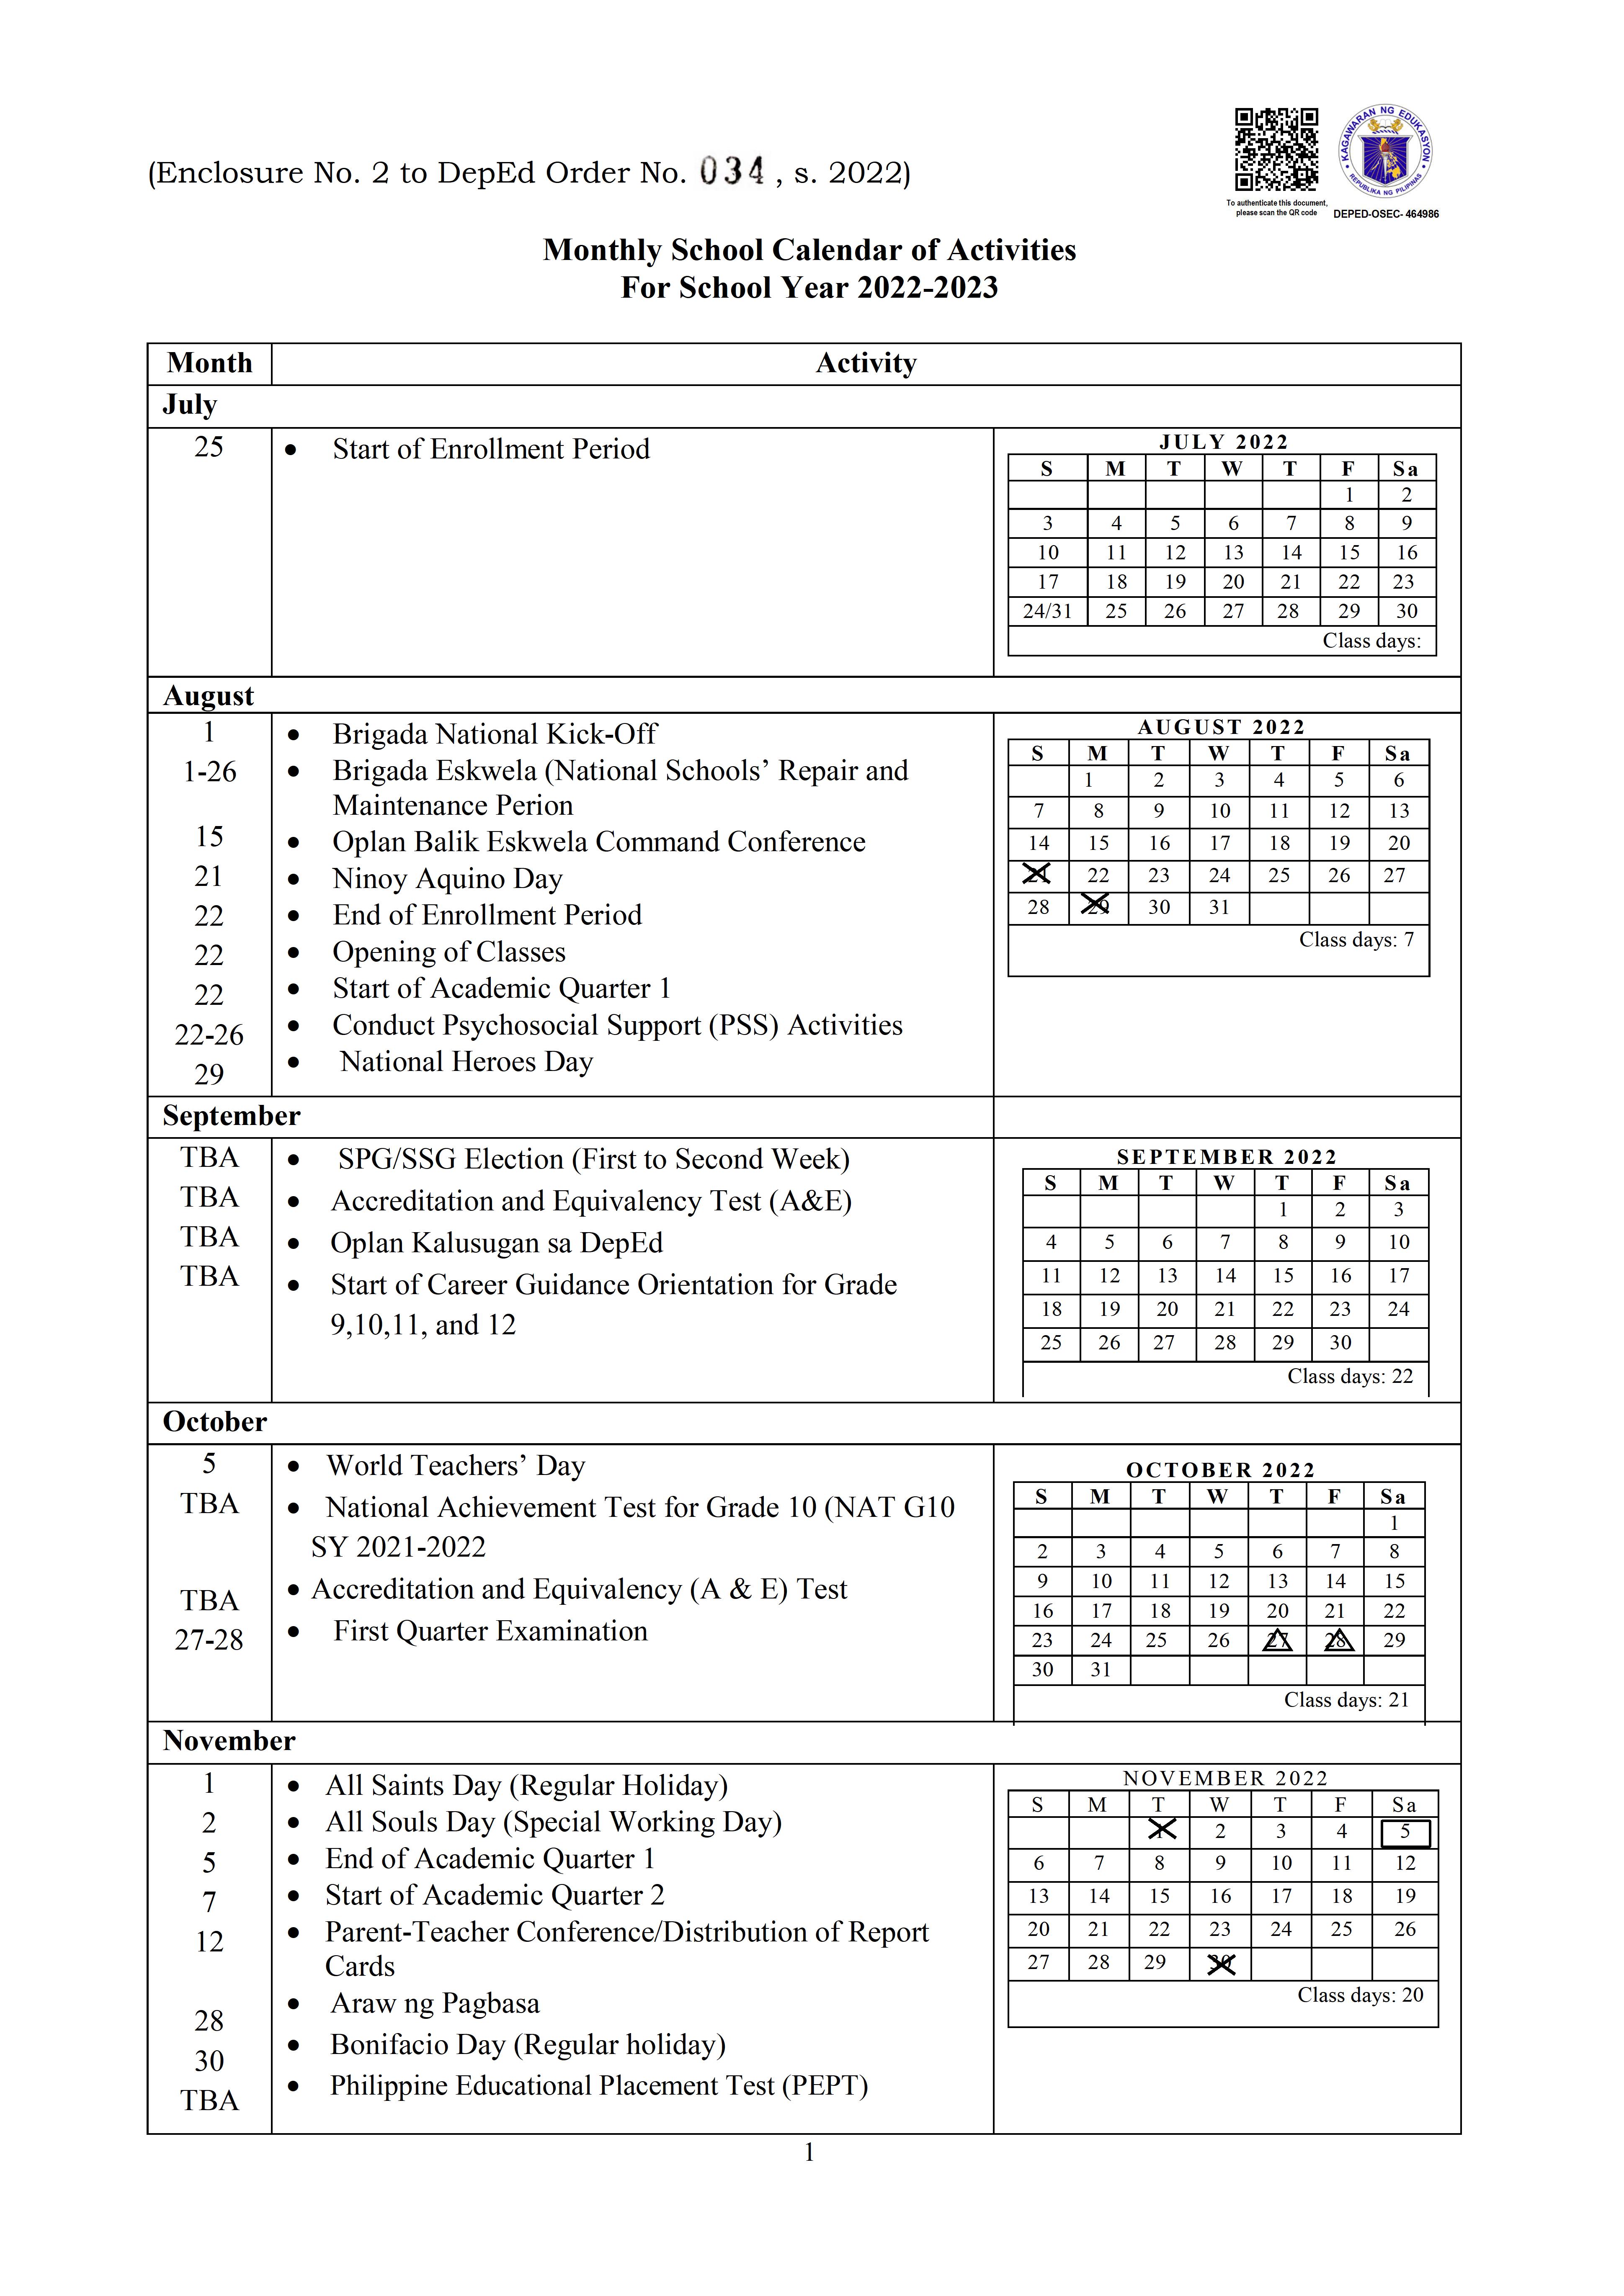 deped-released-official-school-calendar-and-activities-for-sy-2021-2022